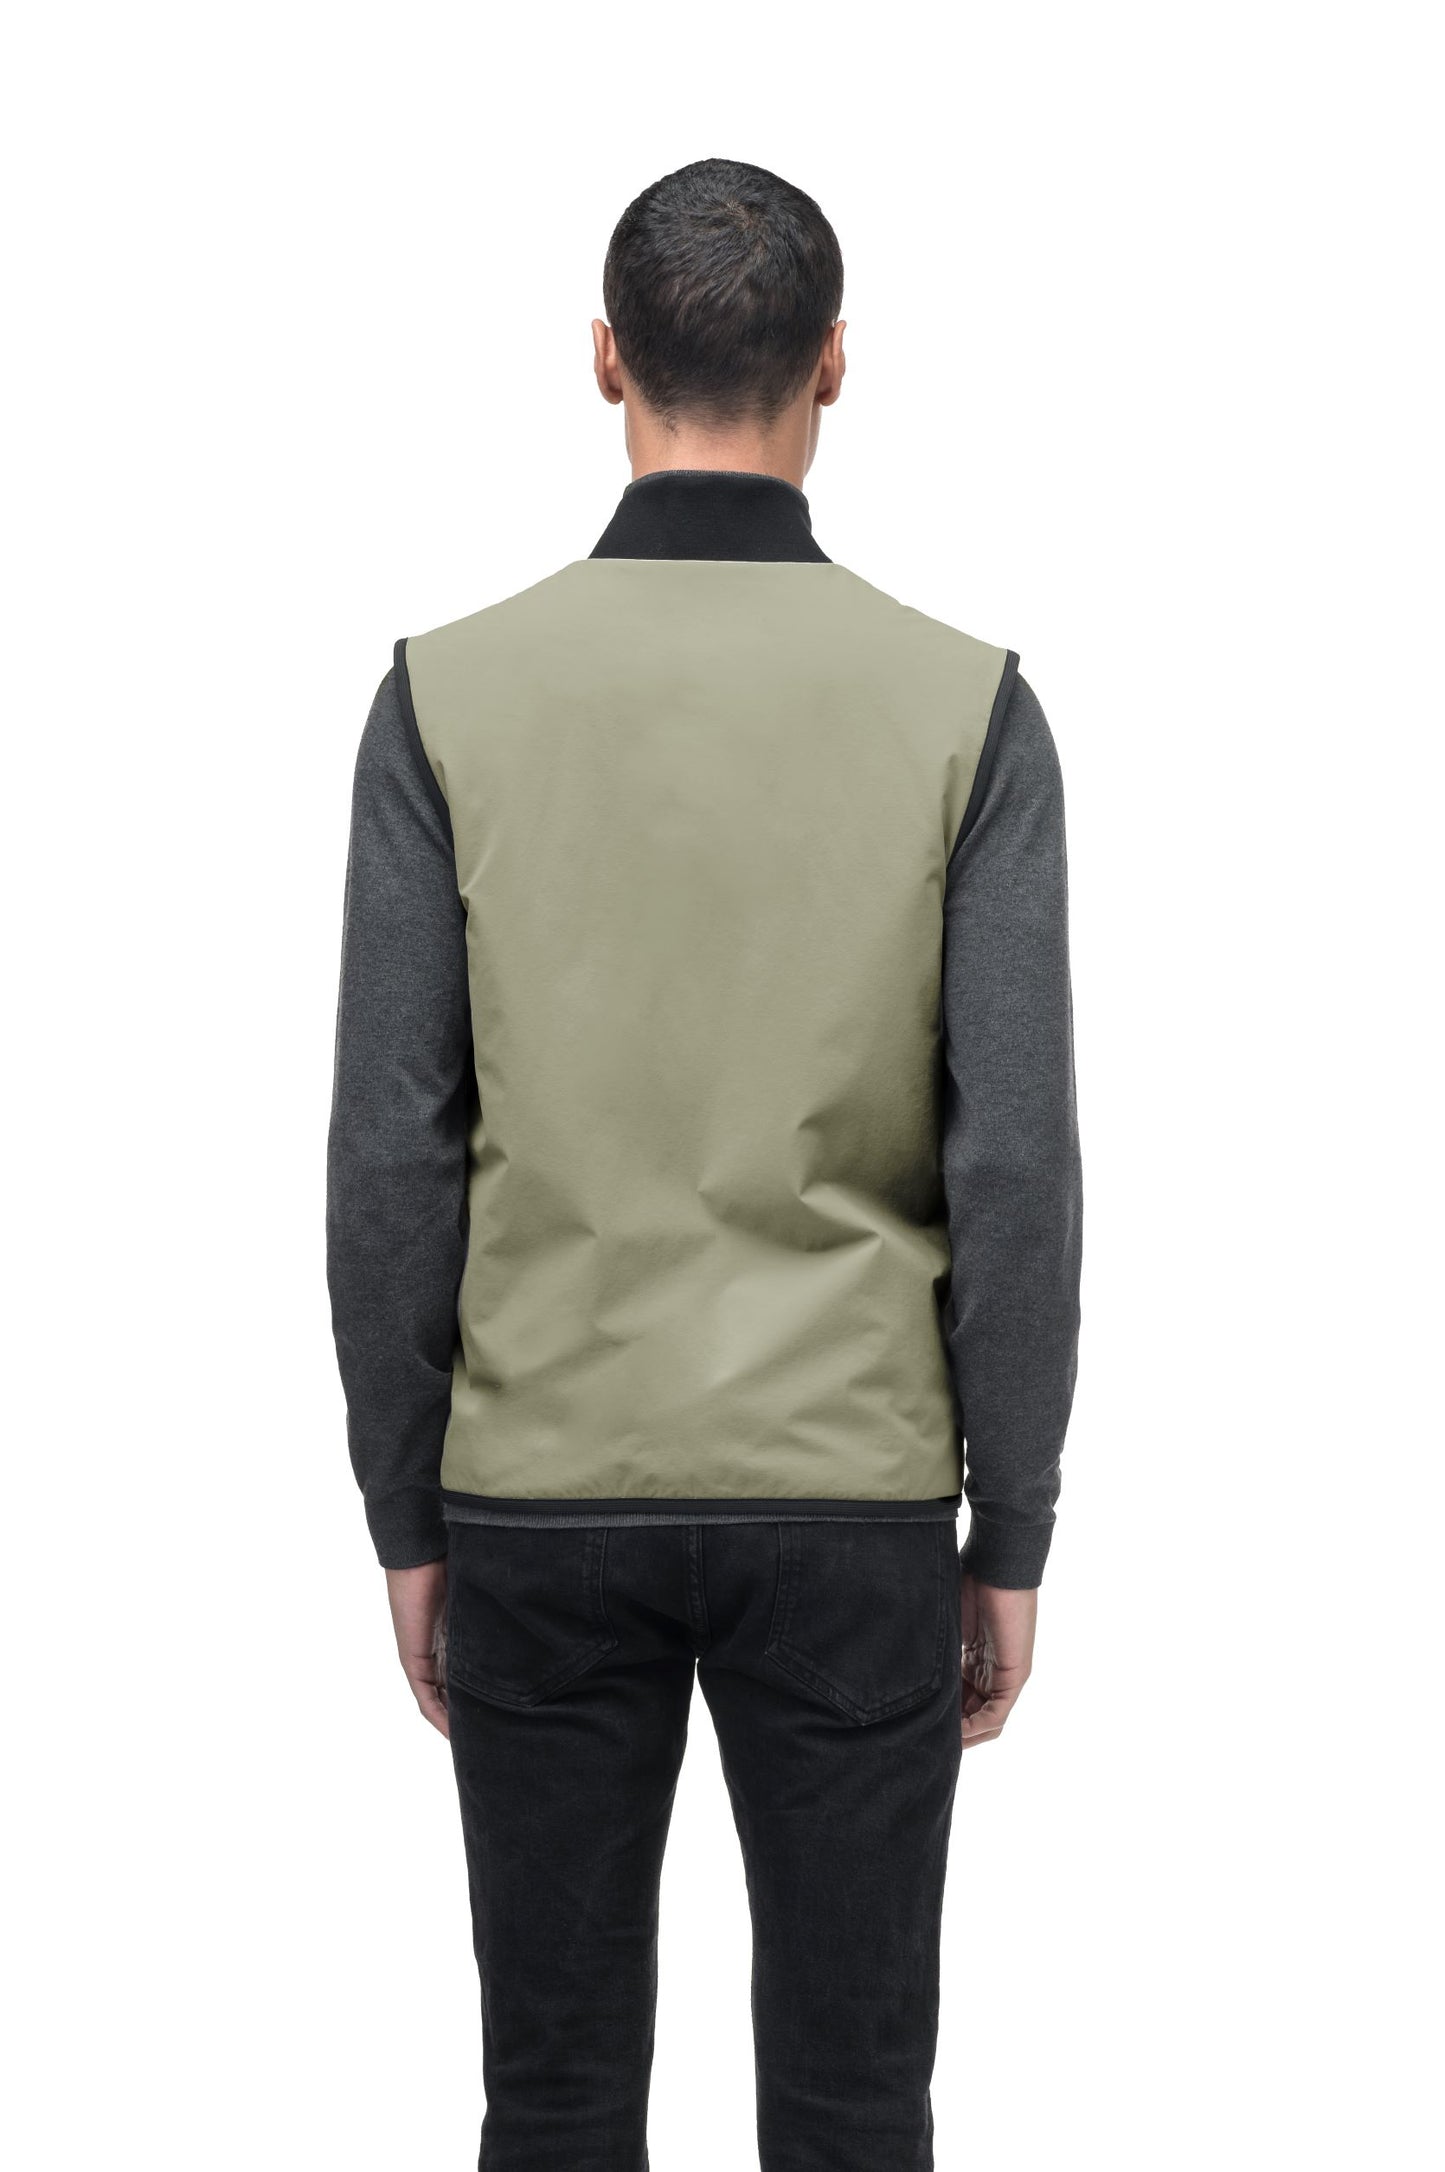 Neo Men's Mid Layer Vest in hip length, Primaloft Gold Insulation Active+, and two-way zipper, in Tea